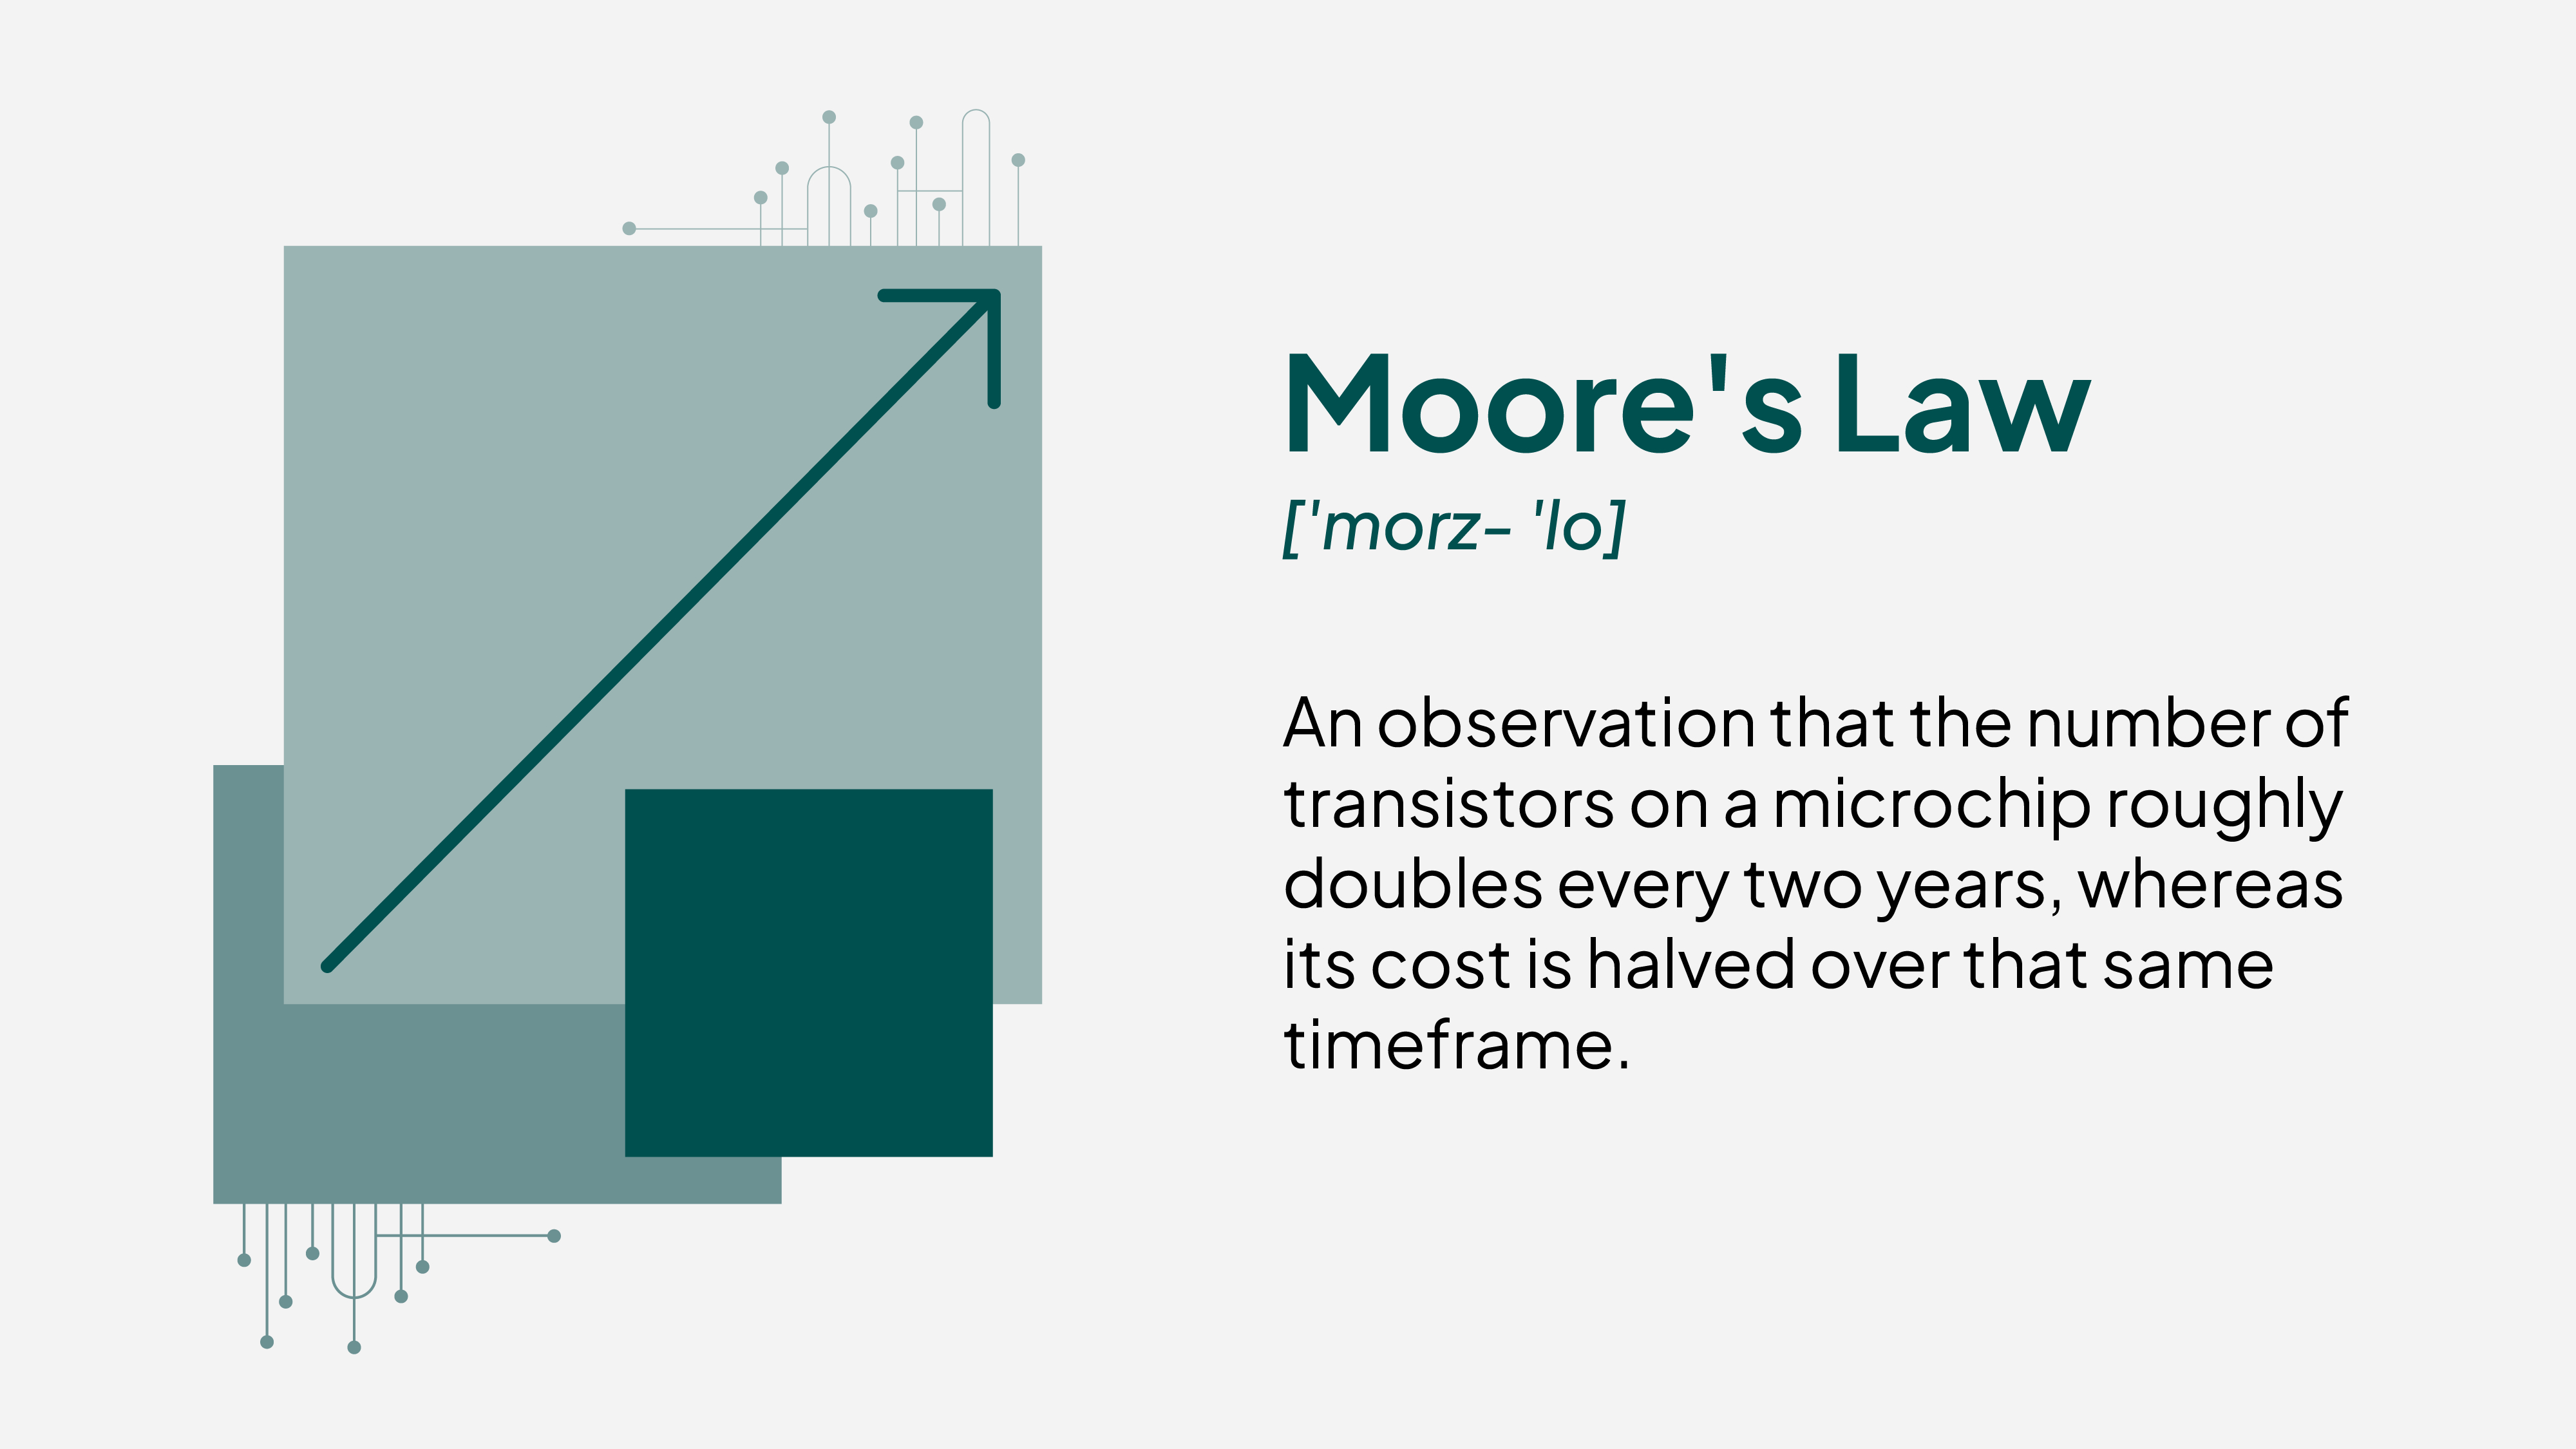 Definition of Moore's Law